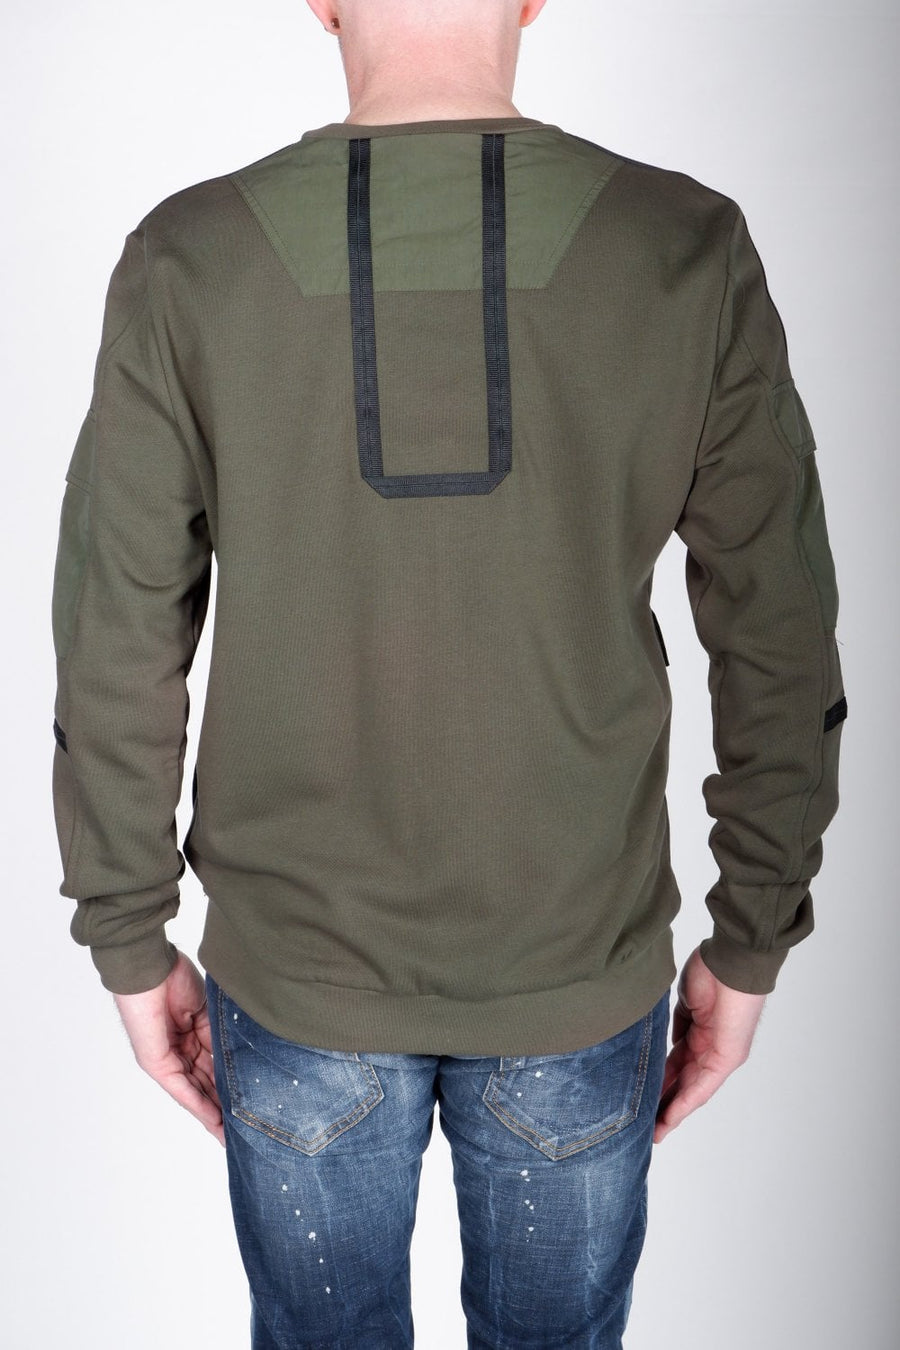 Buy the Antony Morato Multi Pocket Sweatshirt Khaki at Intro. Spend £50 for free UK delivery. Official stockists. We ship worldwide.